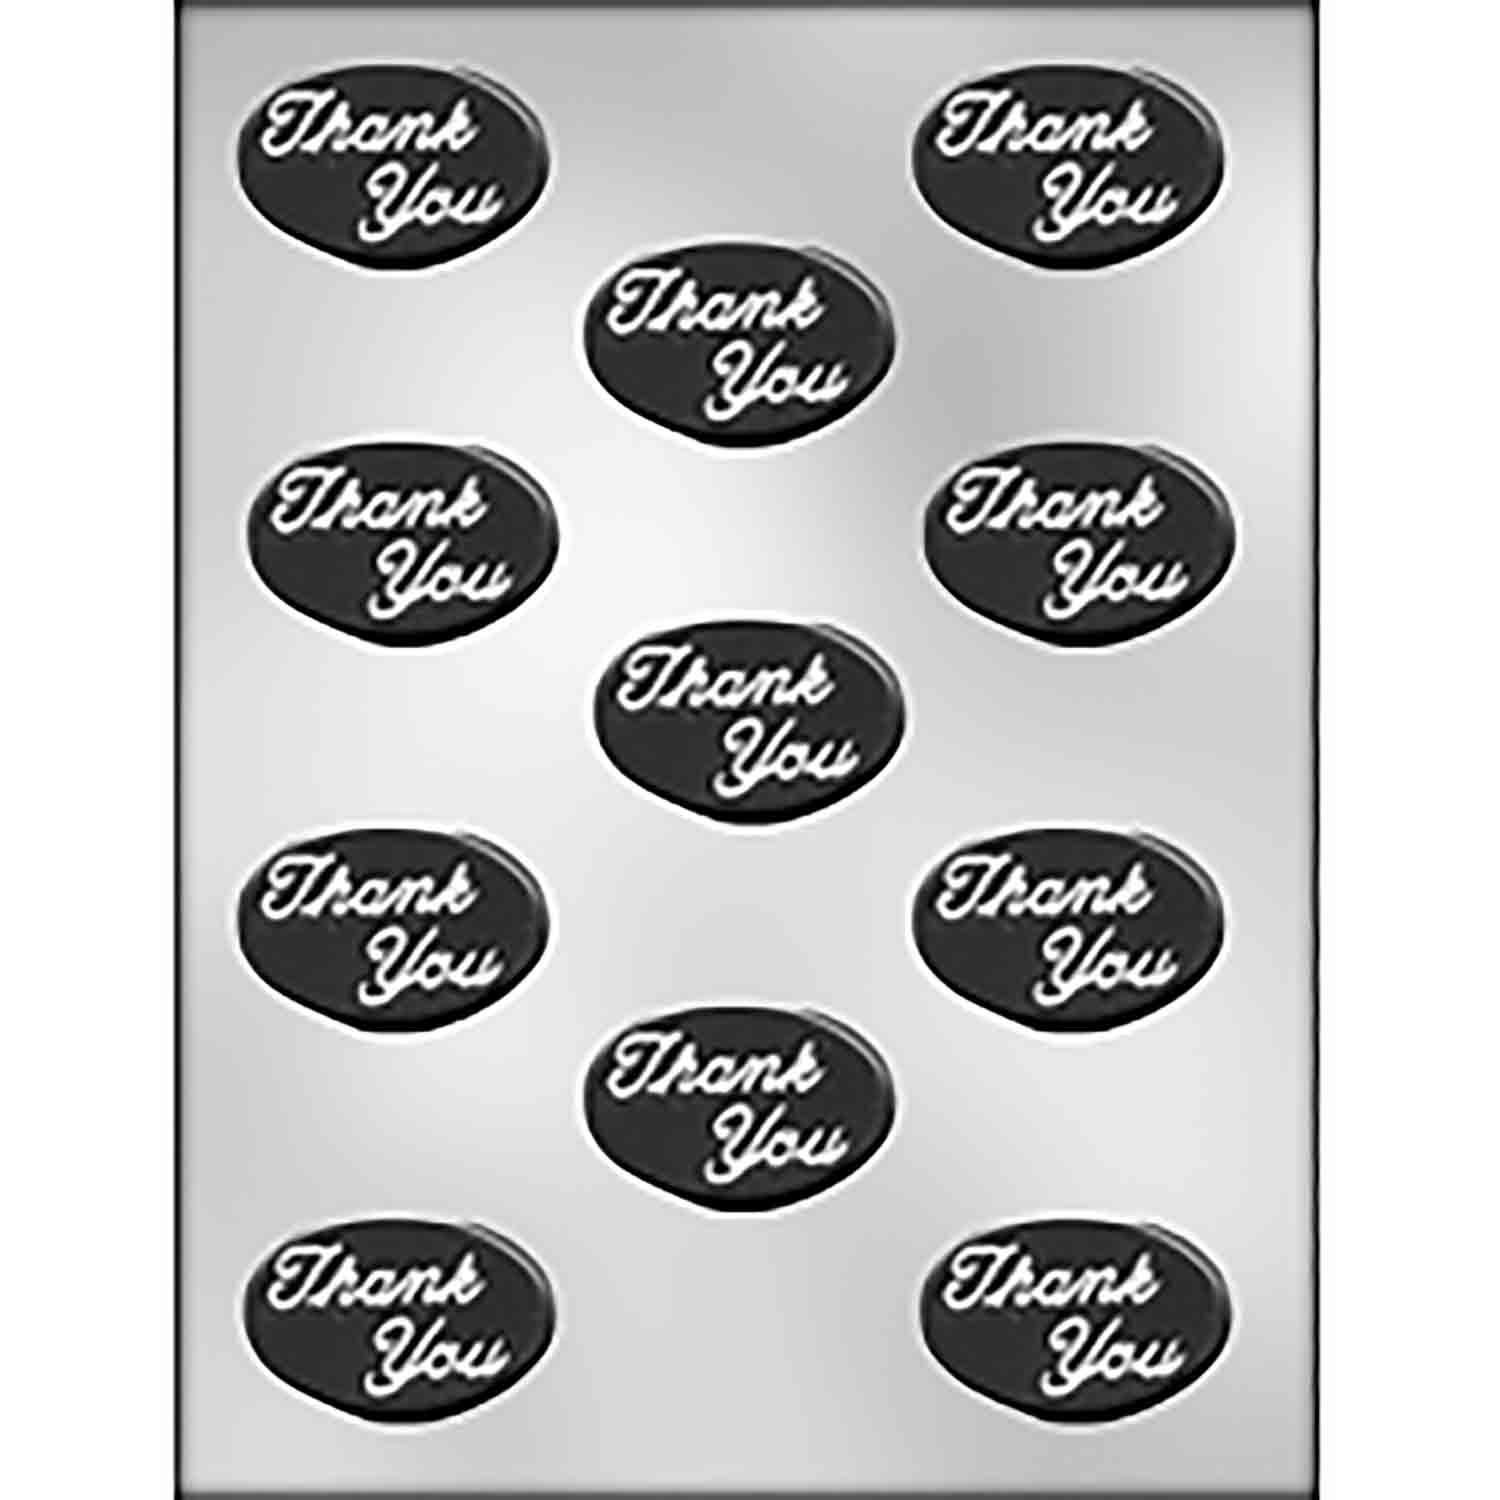 "Thank You" (Script) on Oval Chocolate Candy Mold